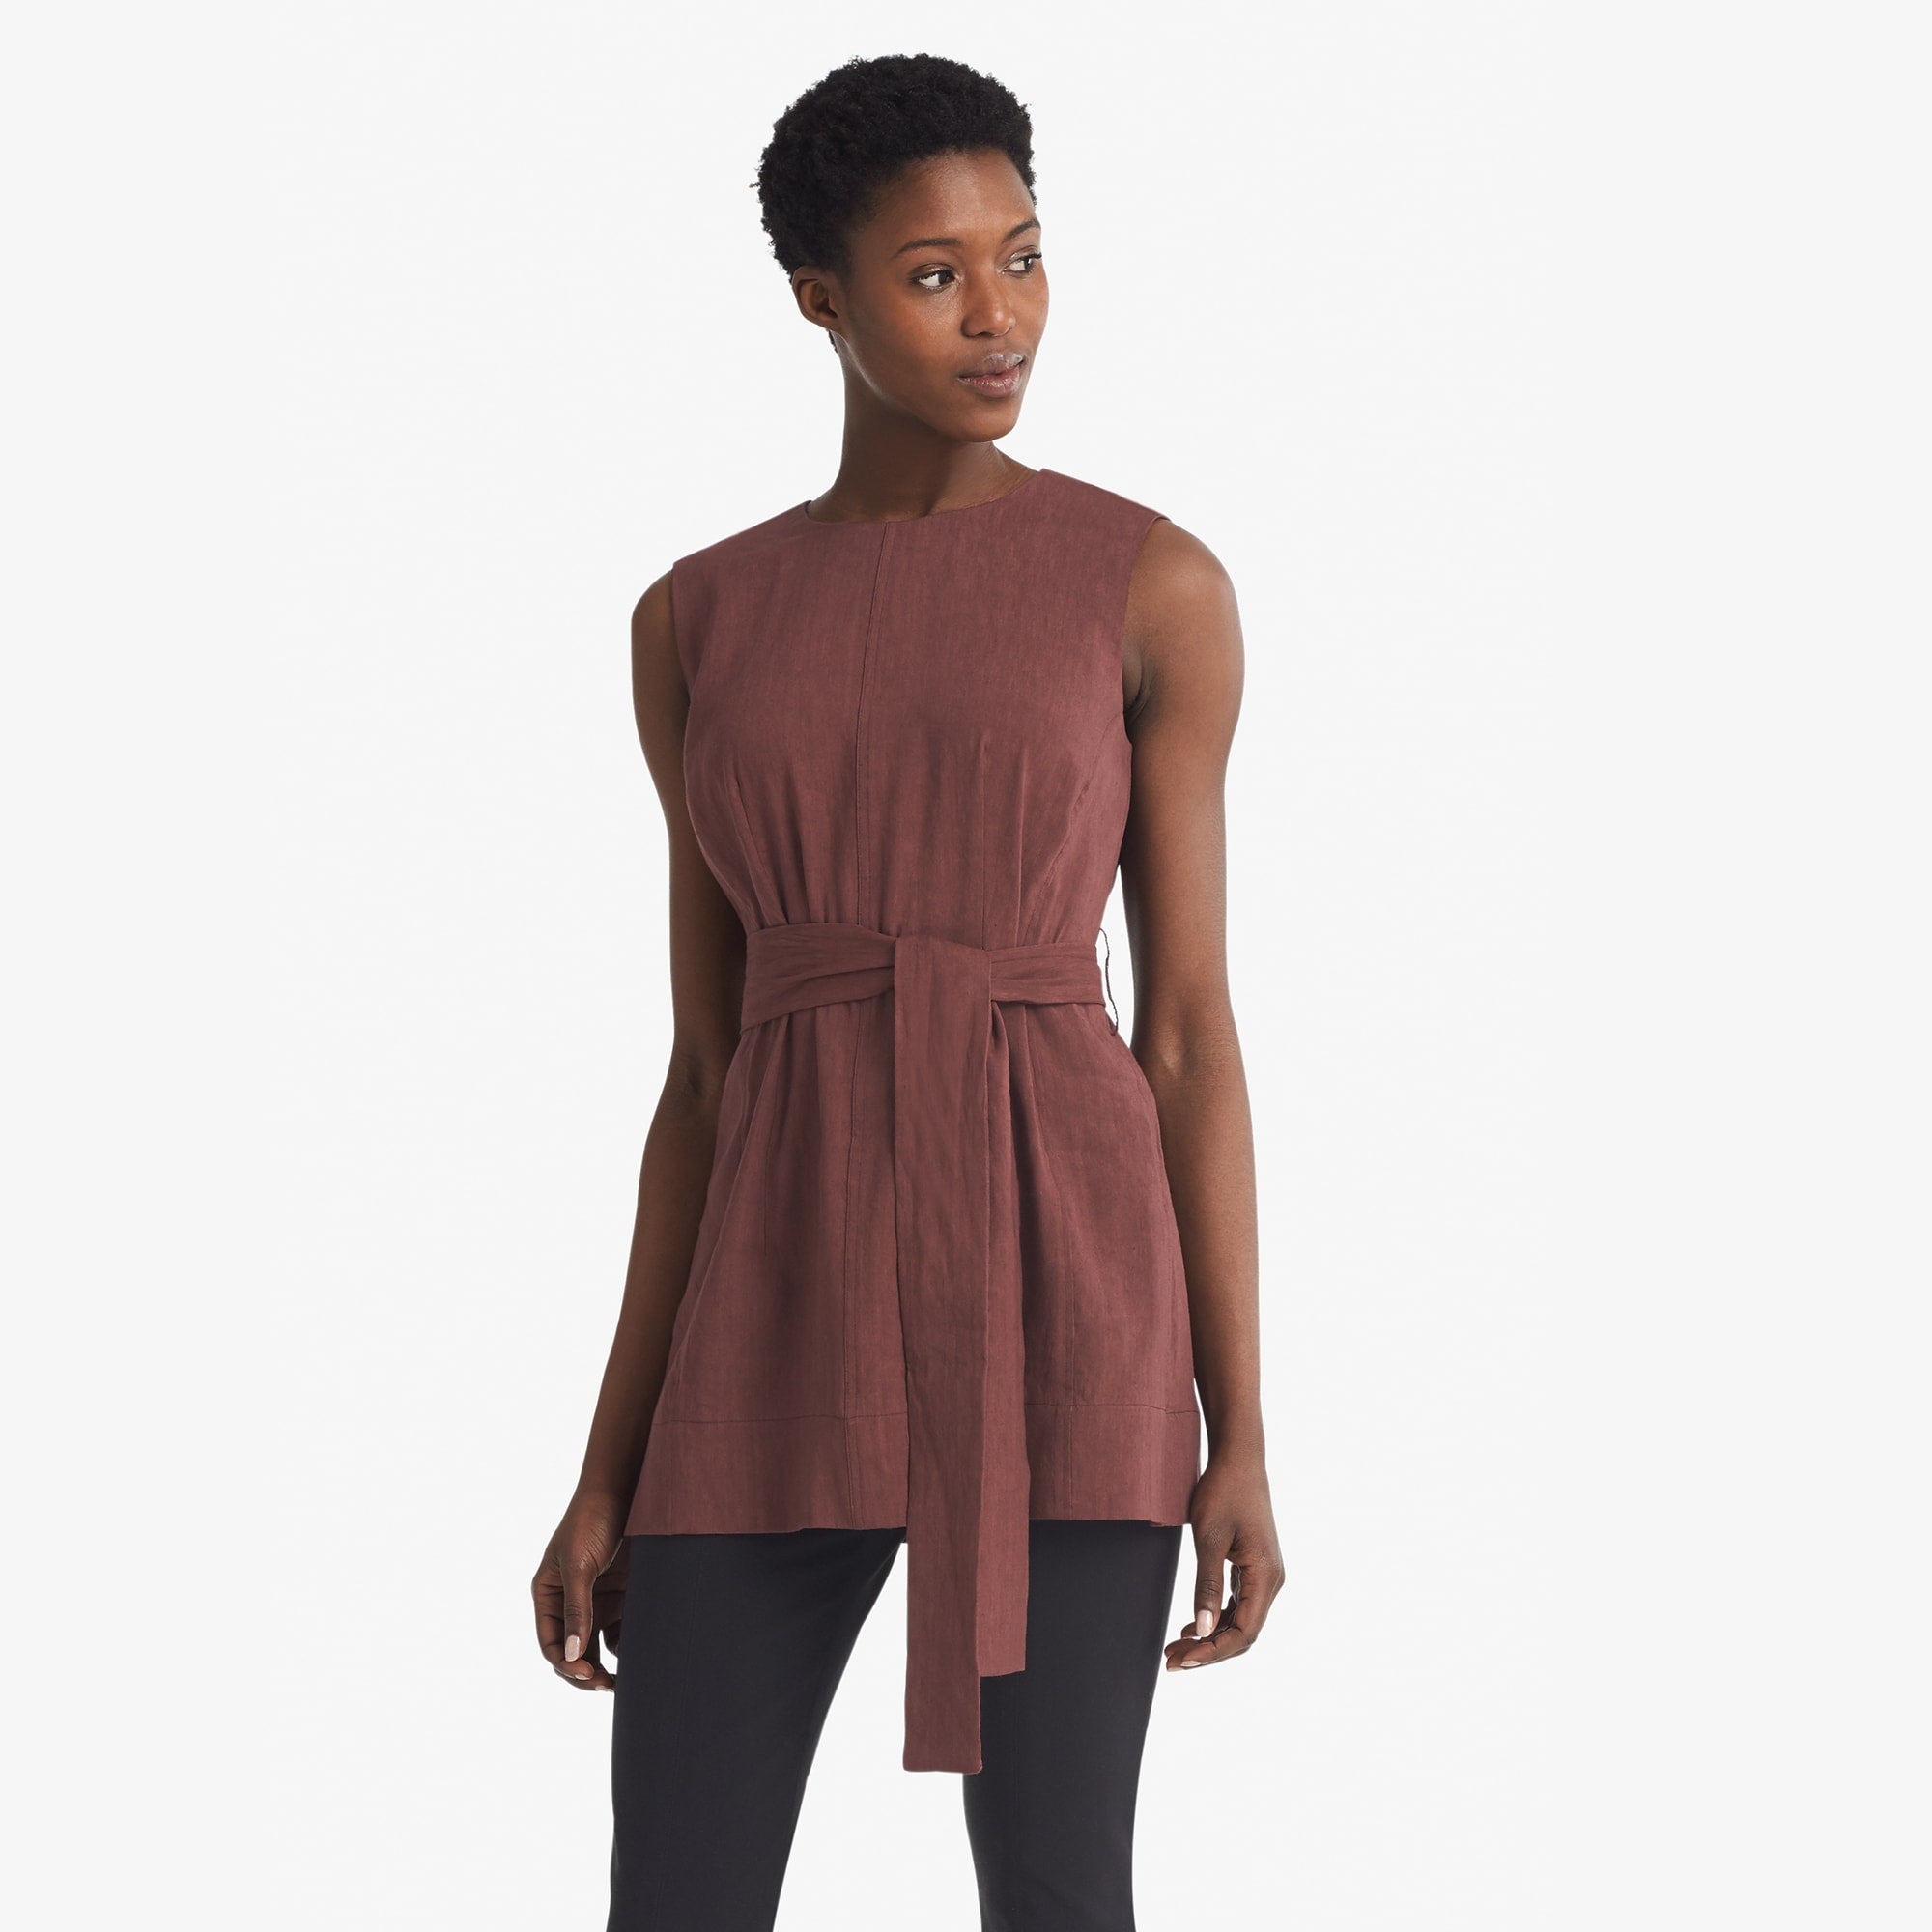 Front image of a woman standing wearing the Angelina top stretch linen in sumac 